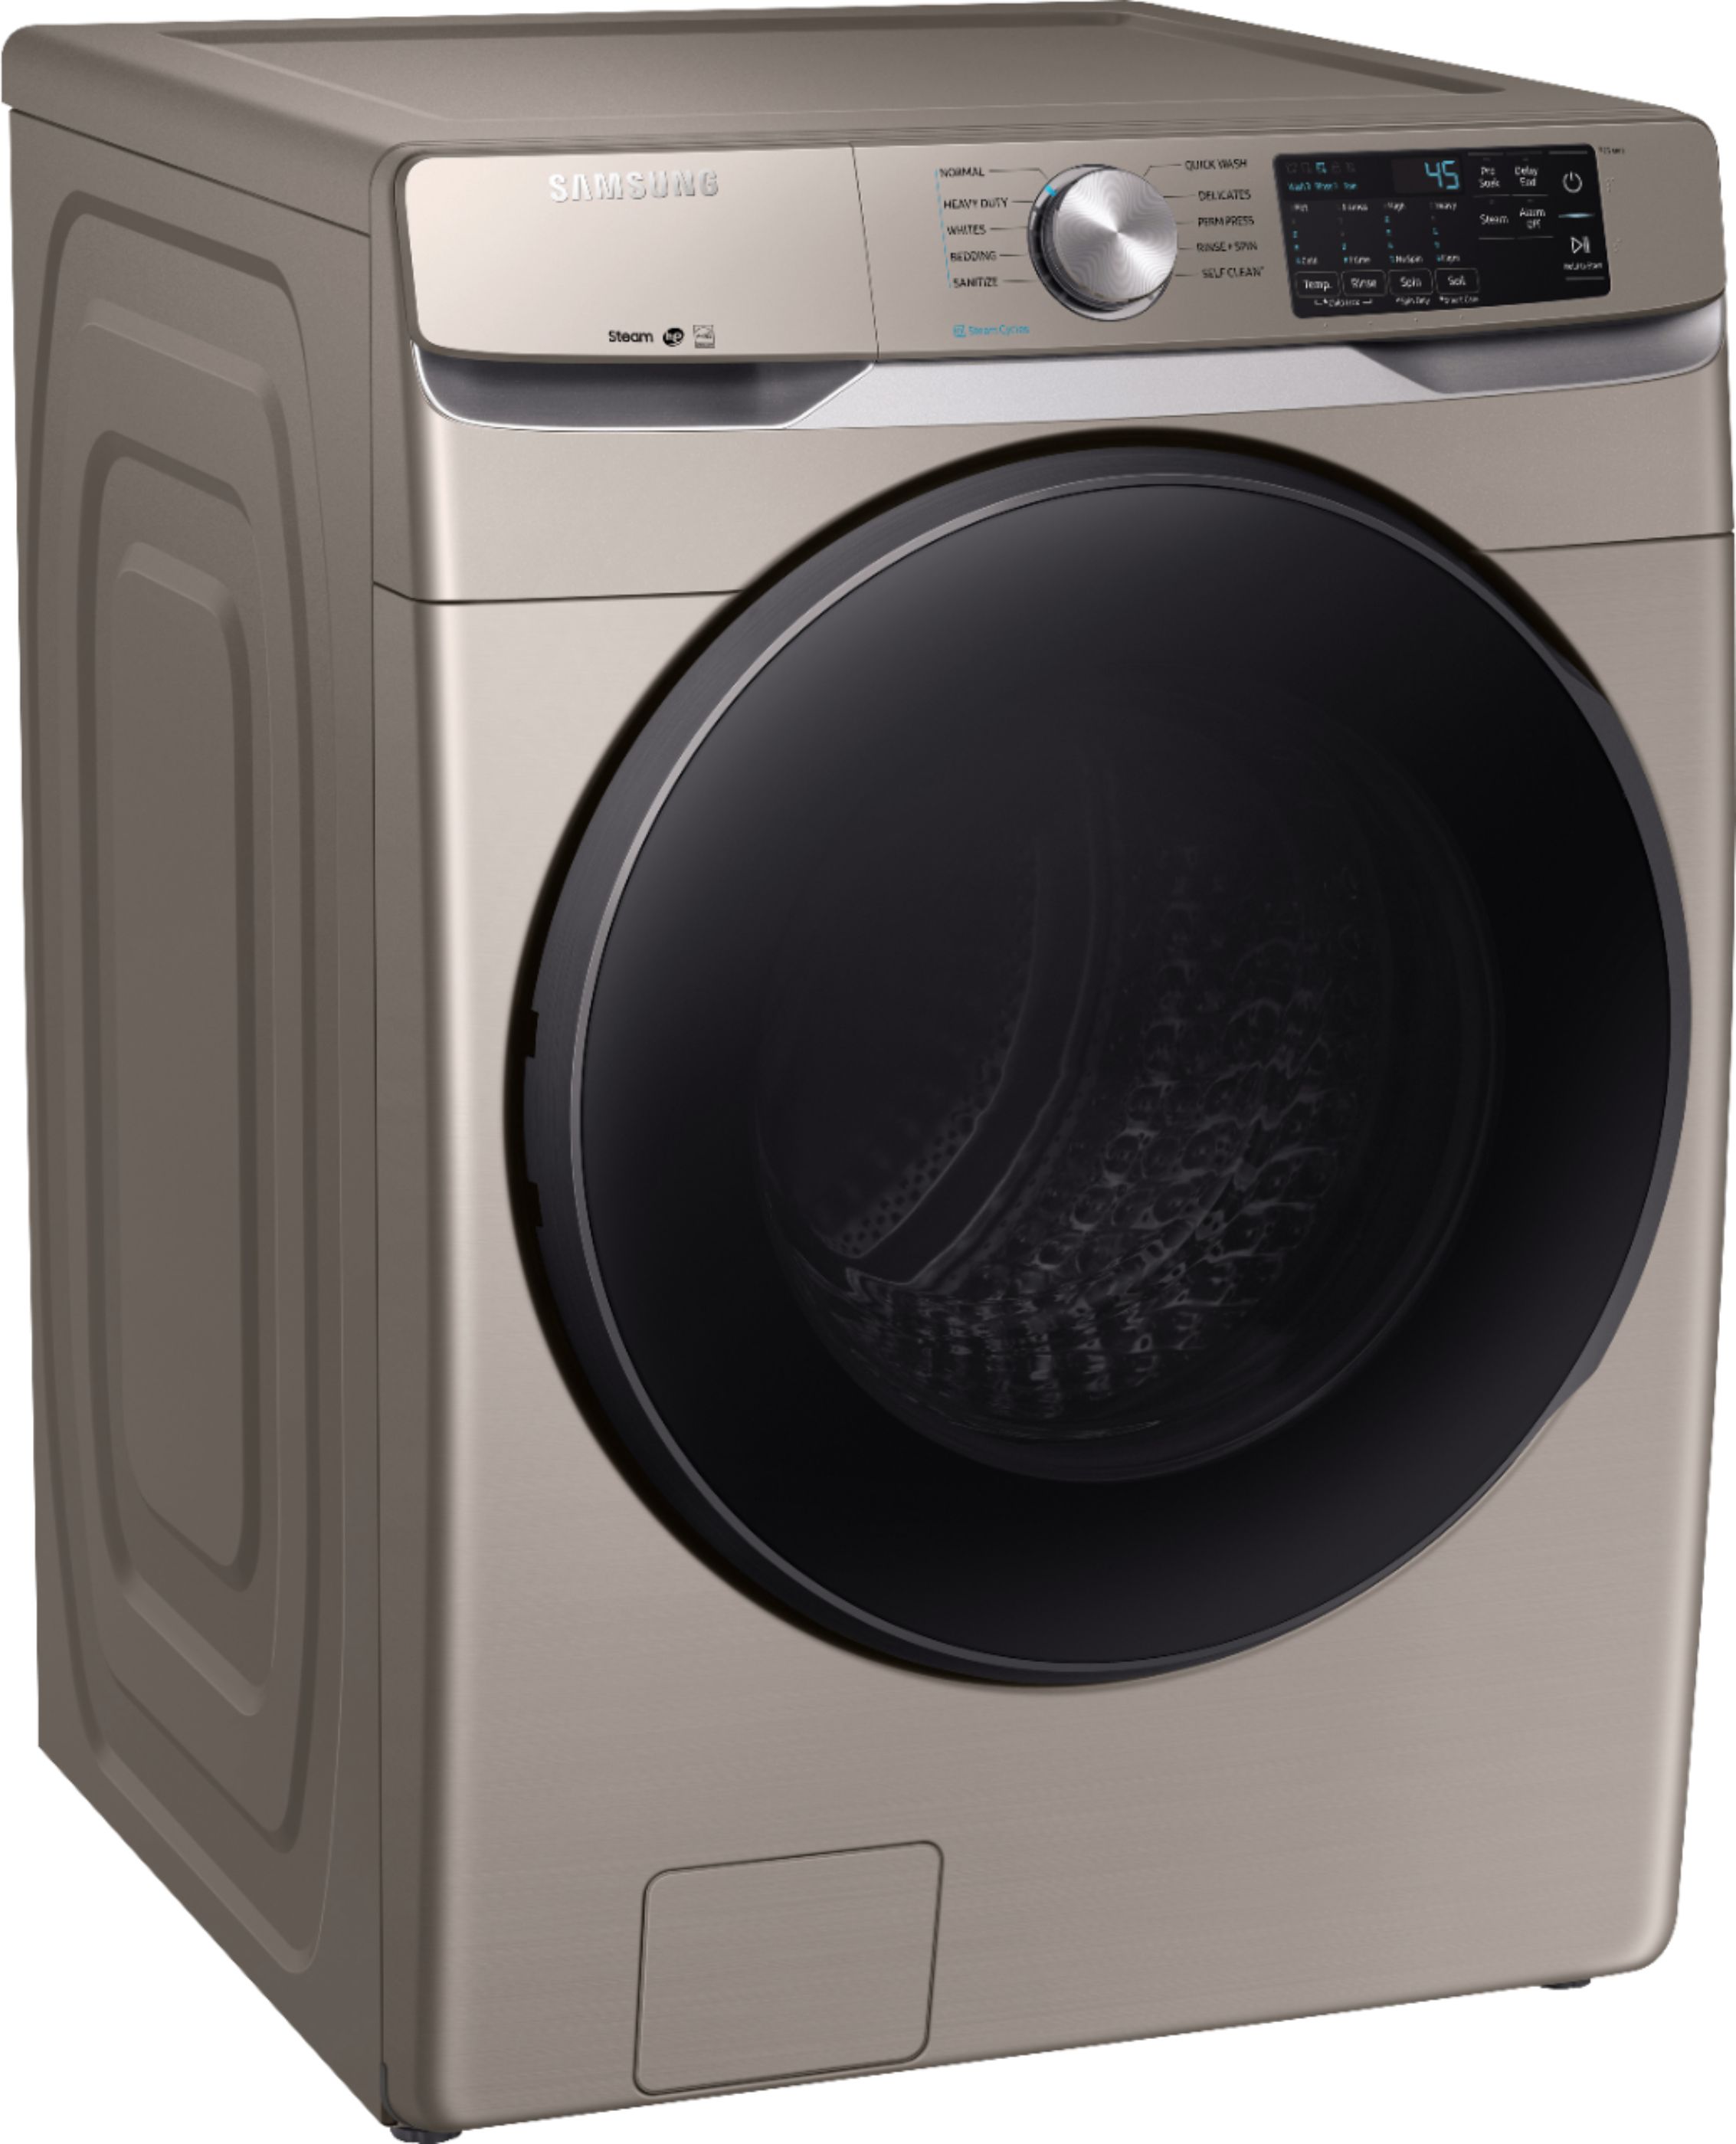 Angle View: Samsung - 4.5 Cu. Ft. High-Efficiency Stackable Front Load Washer with Steam and Self Clean+ - Champagne